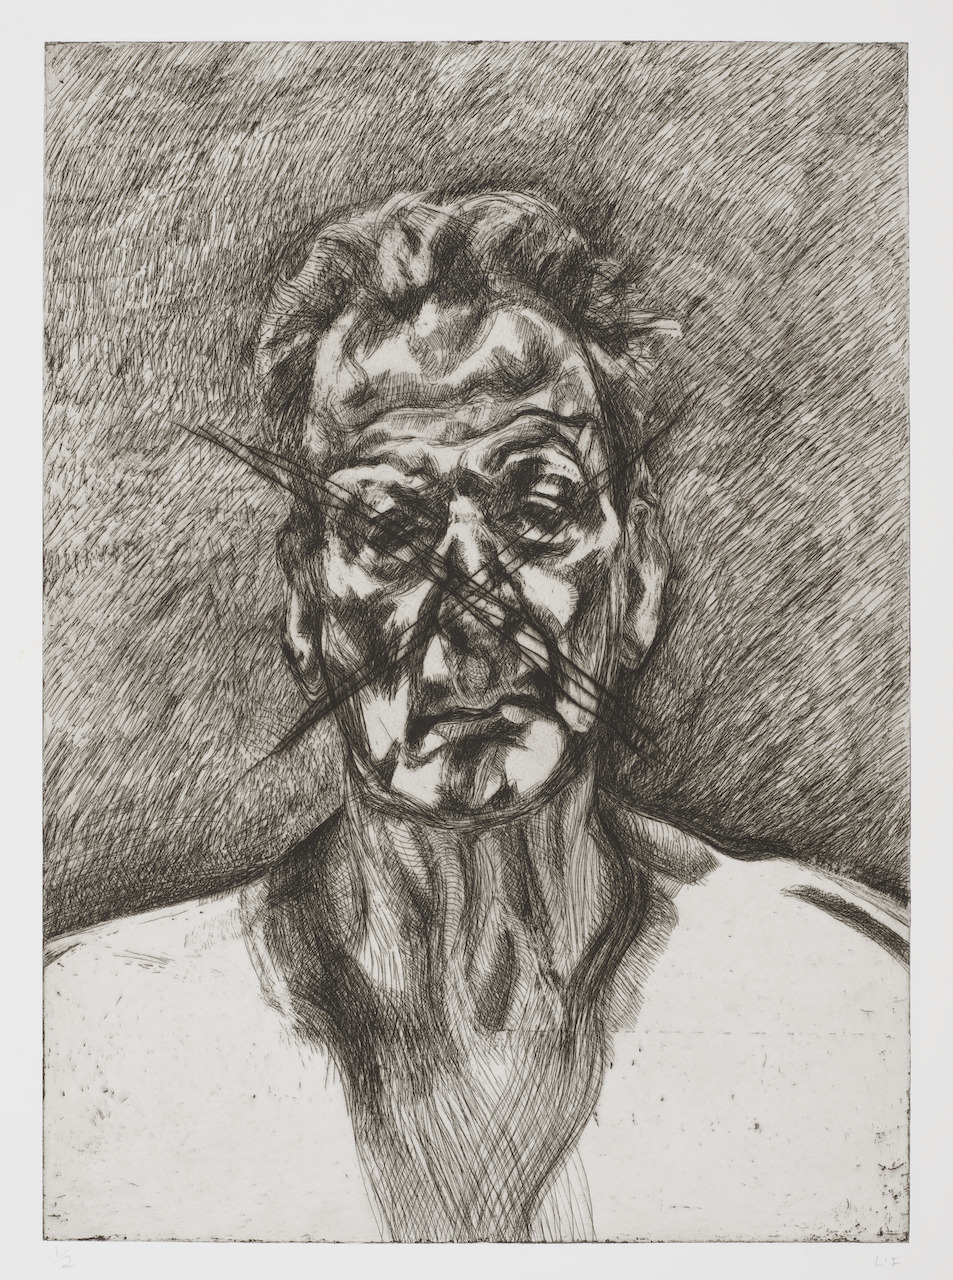 Lucian Freud's Etchings V&A - Cancellation proof self-portrait